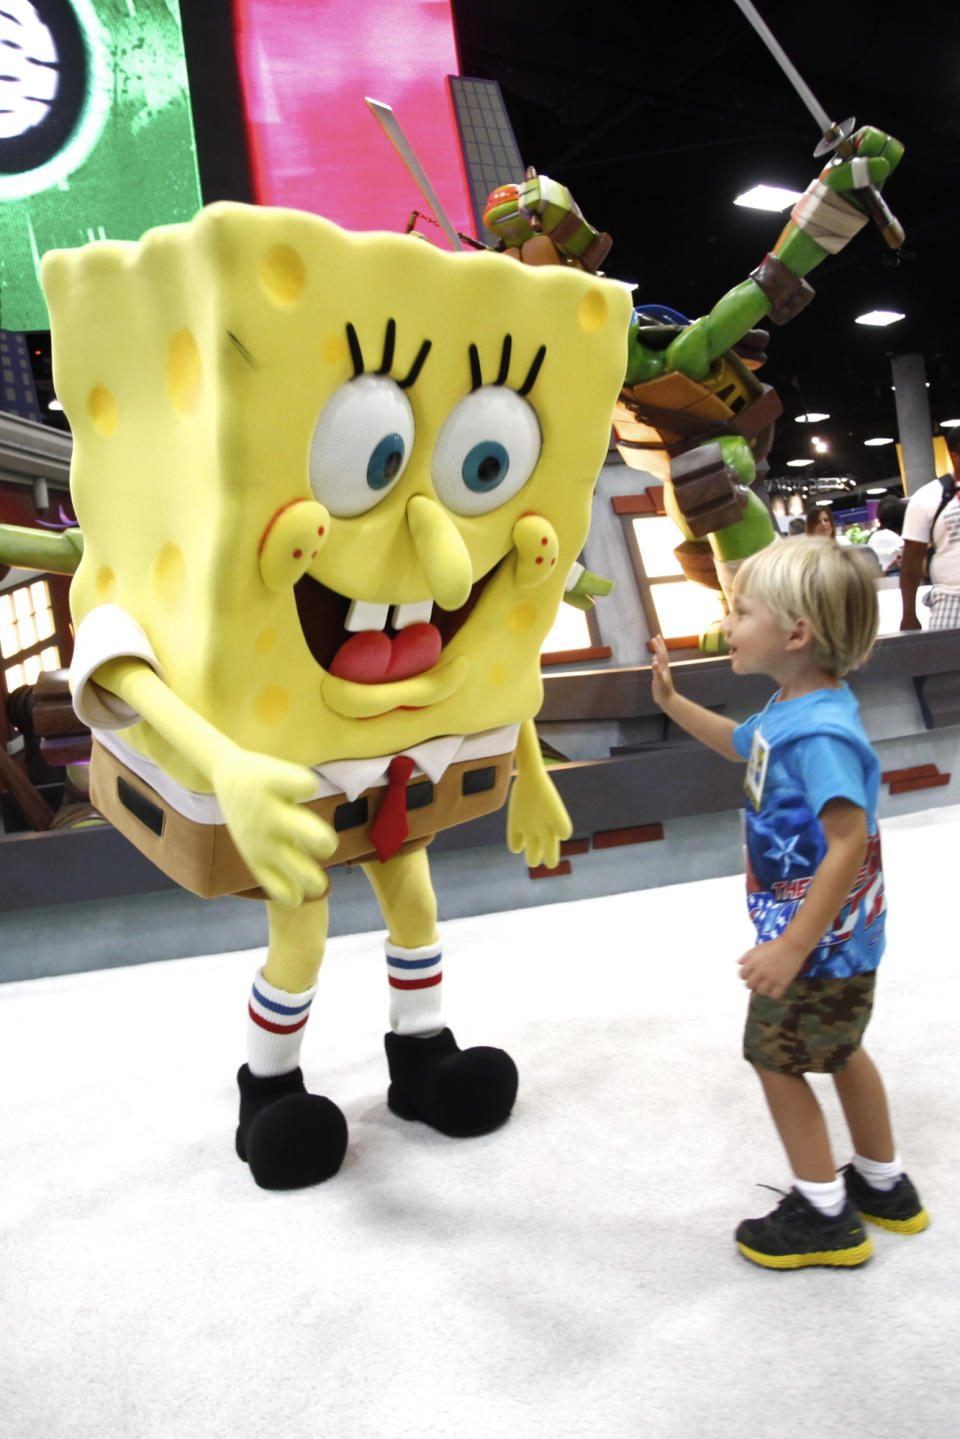 FILE - In this July 15, 2012 publicity photo provided by Nickelodeon, a fan is seen with SpongeBob SquarePants during Comic-Con, in San Diego, Calif. Storm Troopers, cyborgs, superheroes and other comic-book fans can count on their annual pilgrimage to San Diego for another four years. San Diego Mayor Jerry Sanders announced Monday, Oct. 29, 2012, that Comic-Con has extended its contract with the city through 2016. (AP Photo/Nickelodeon, Joe Kohen, File)